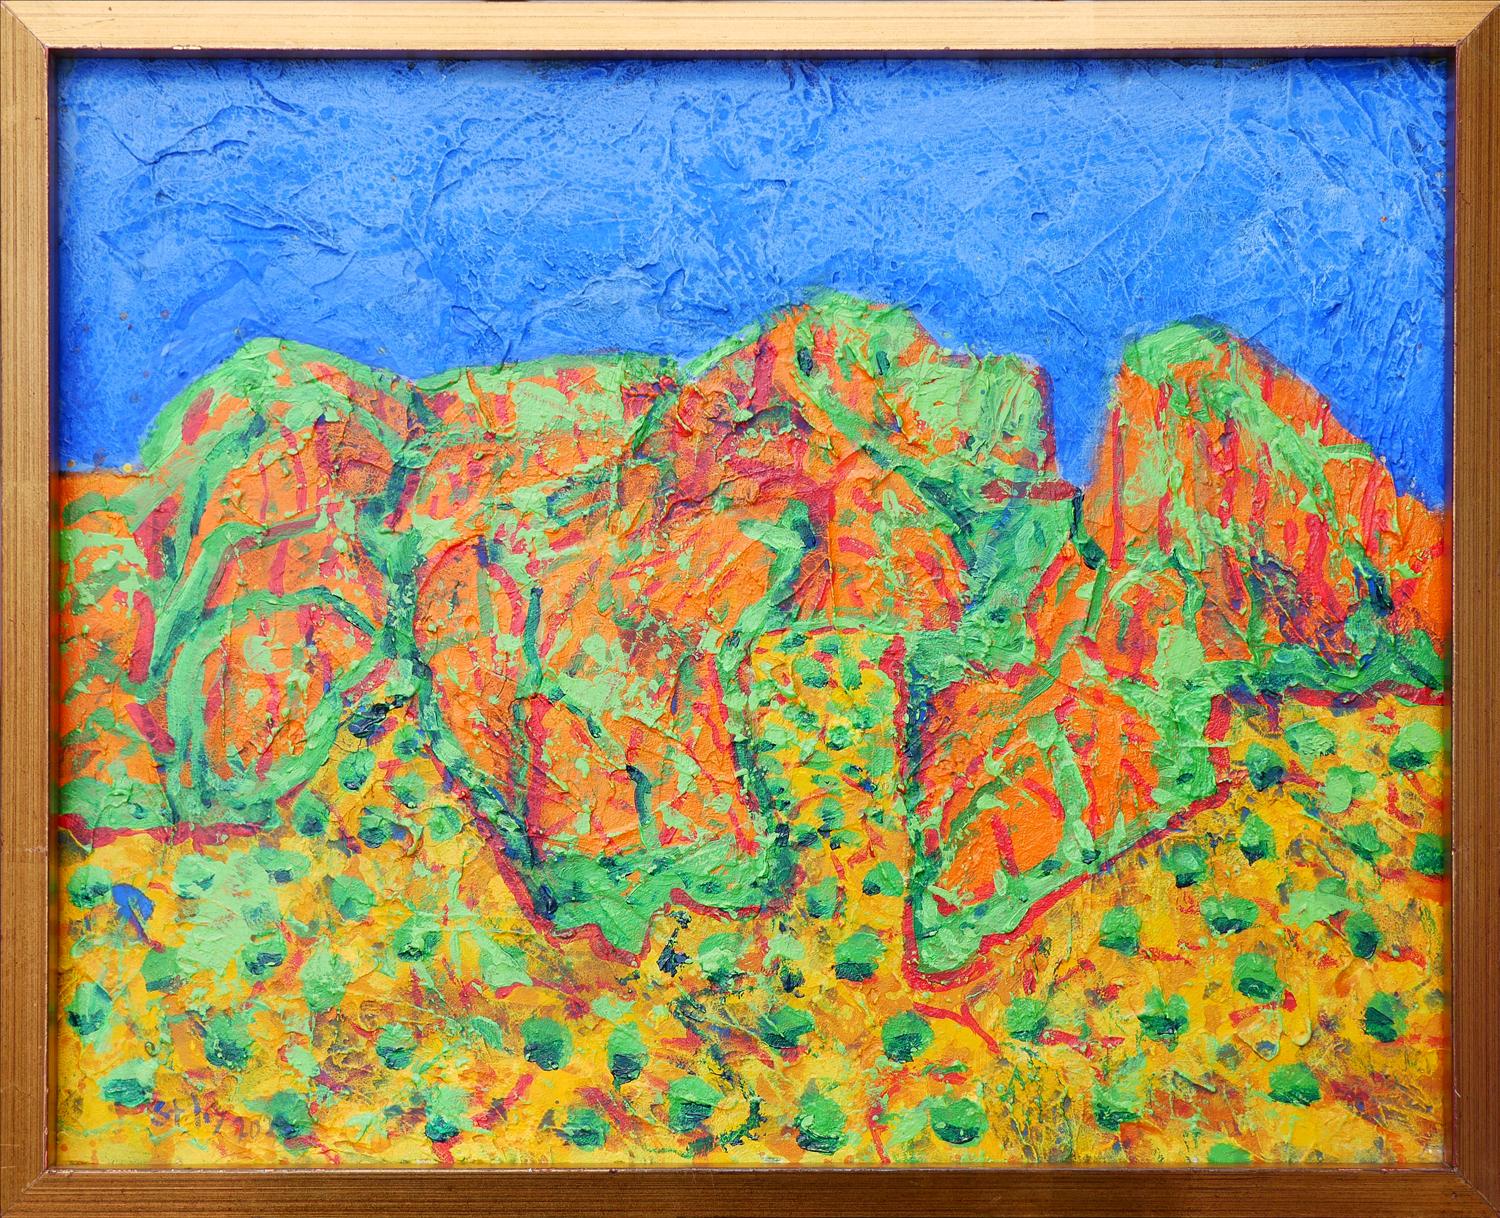 "The Chisos Mountains Big Bend National Park" Abstract Southern Landscape